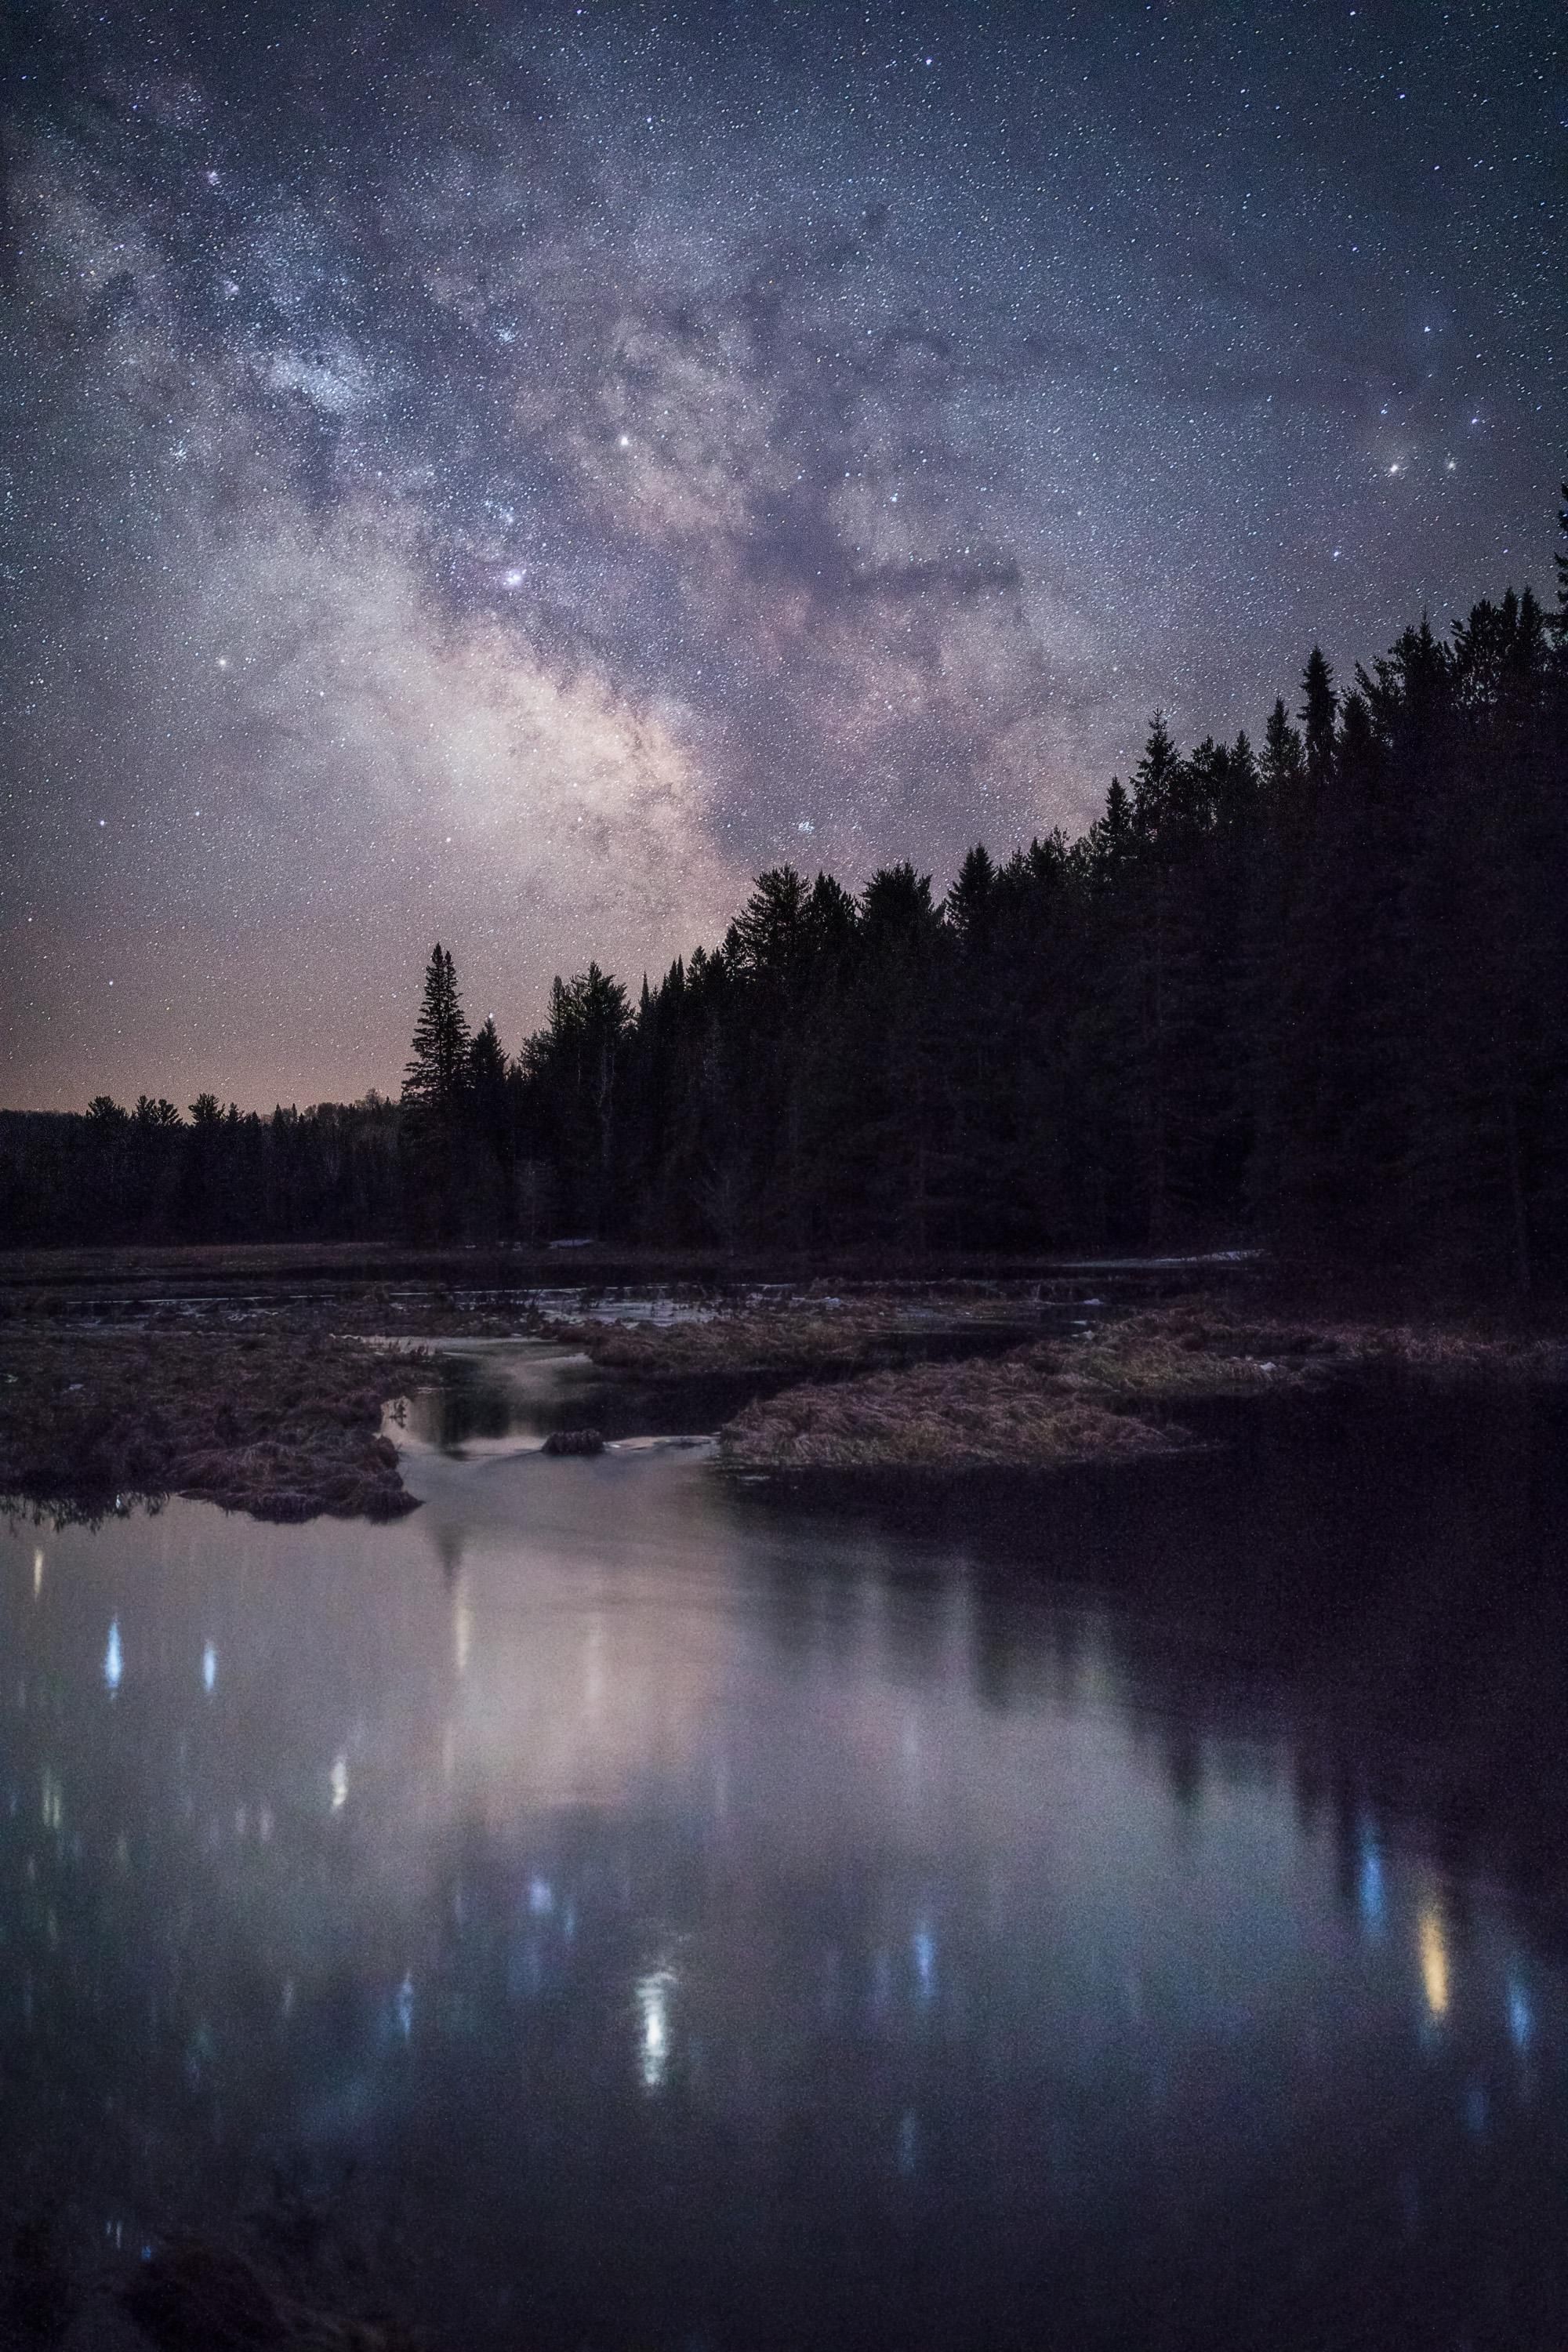 Catching night sky reflections in Algonquin Provincial Park Canada ...